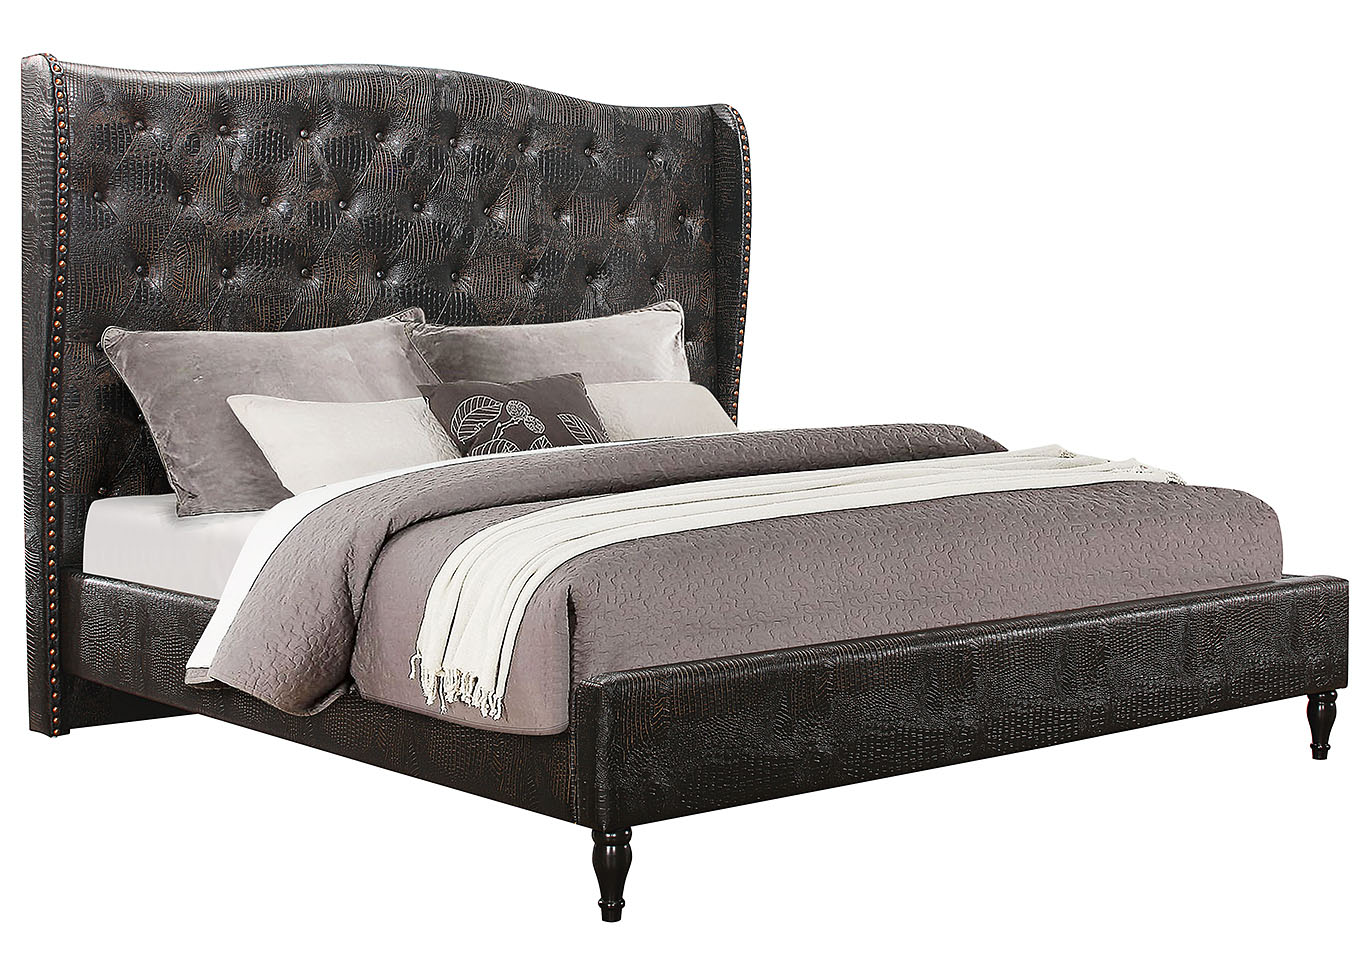 Mirror Chocolate Queen Upholstered Platform Bed,Global Furniture USA